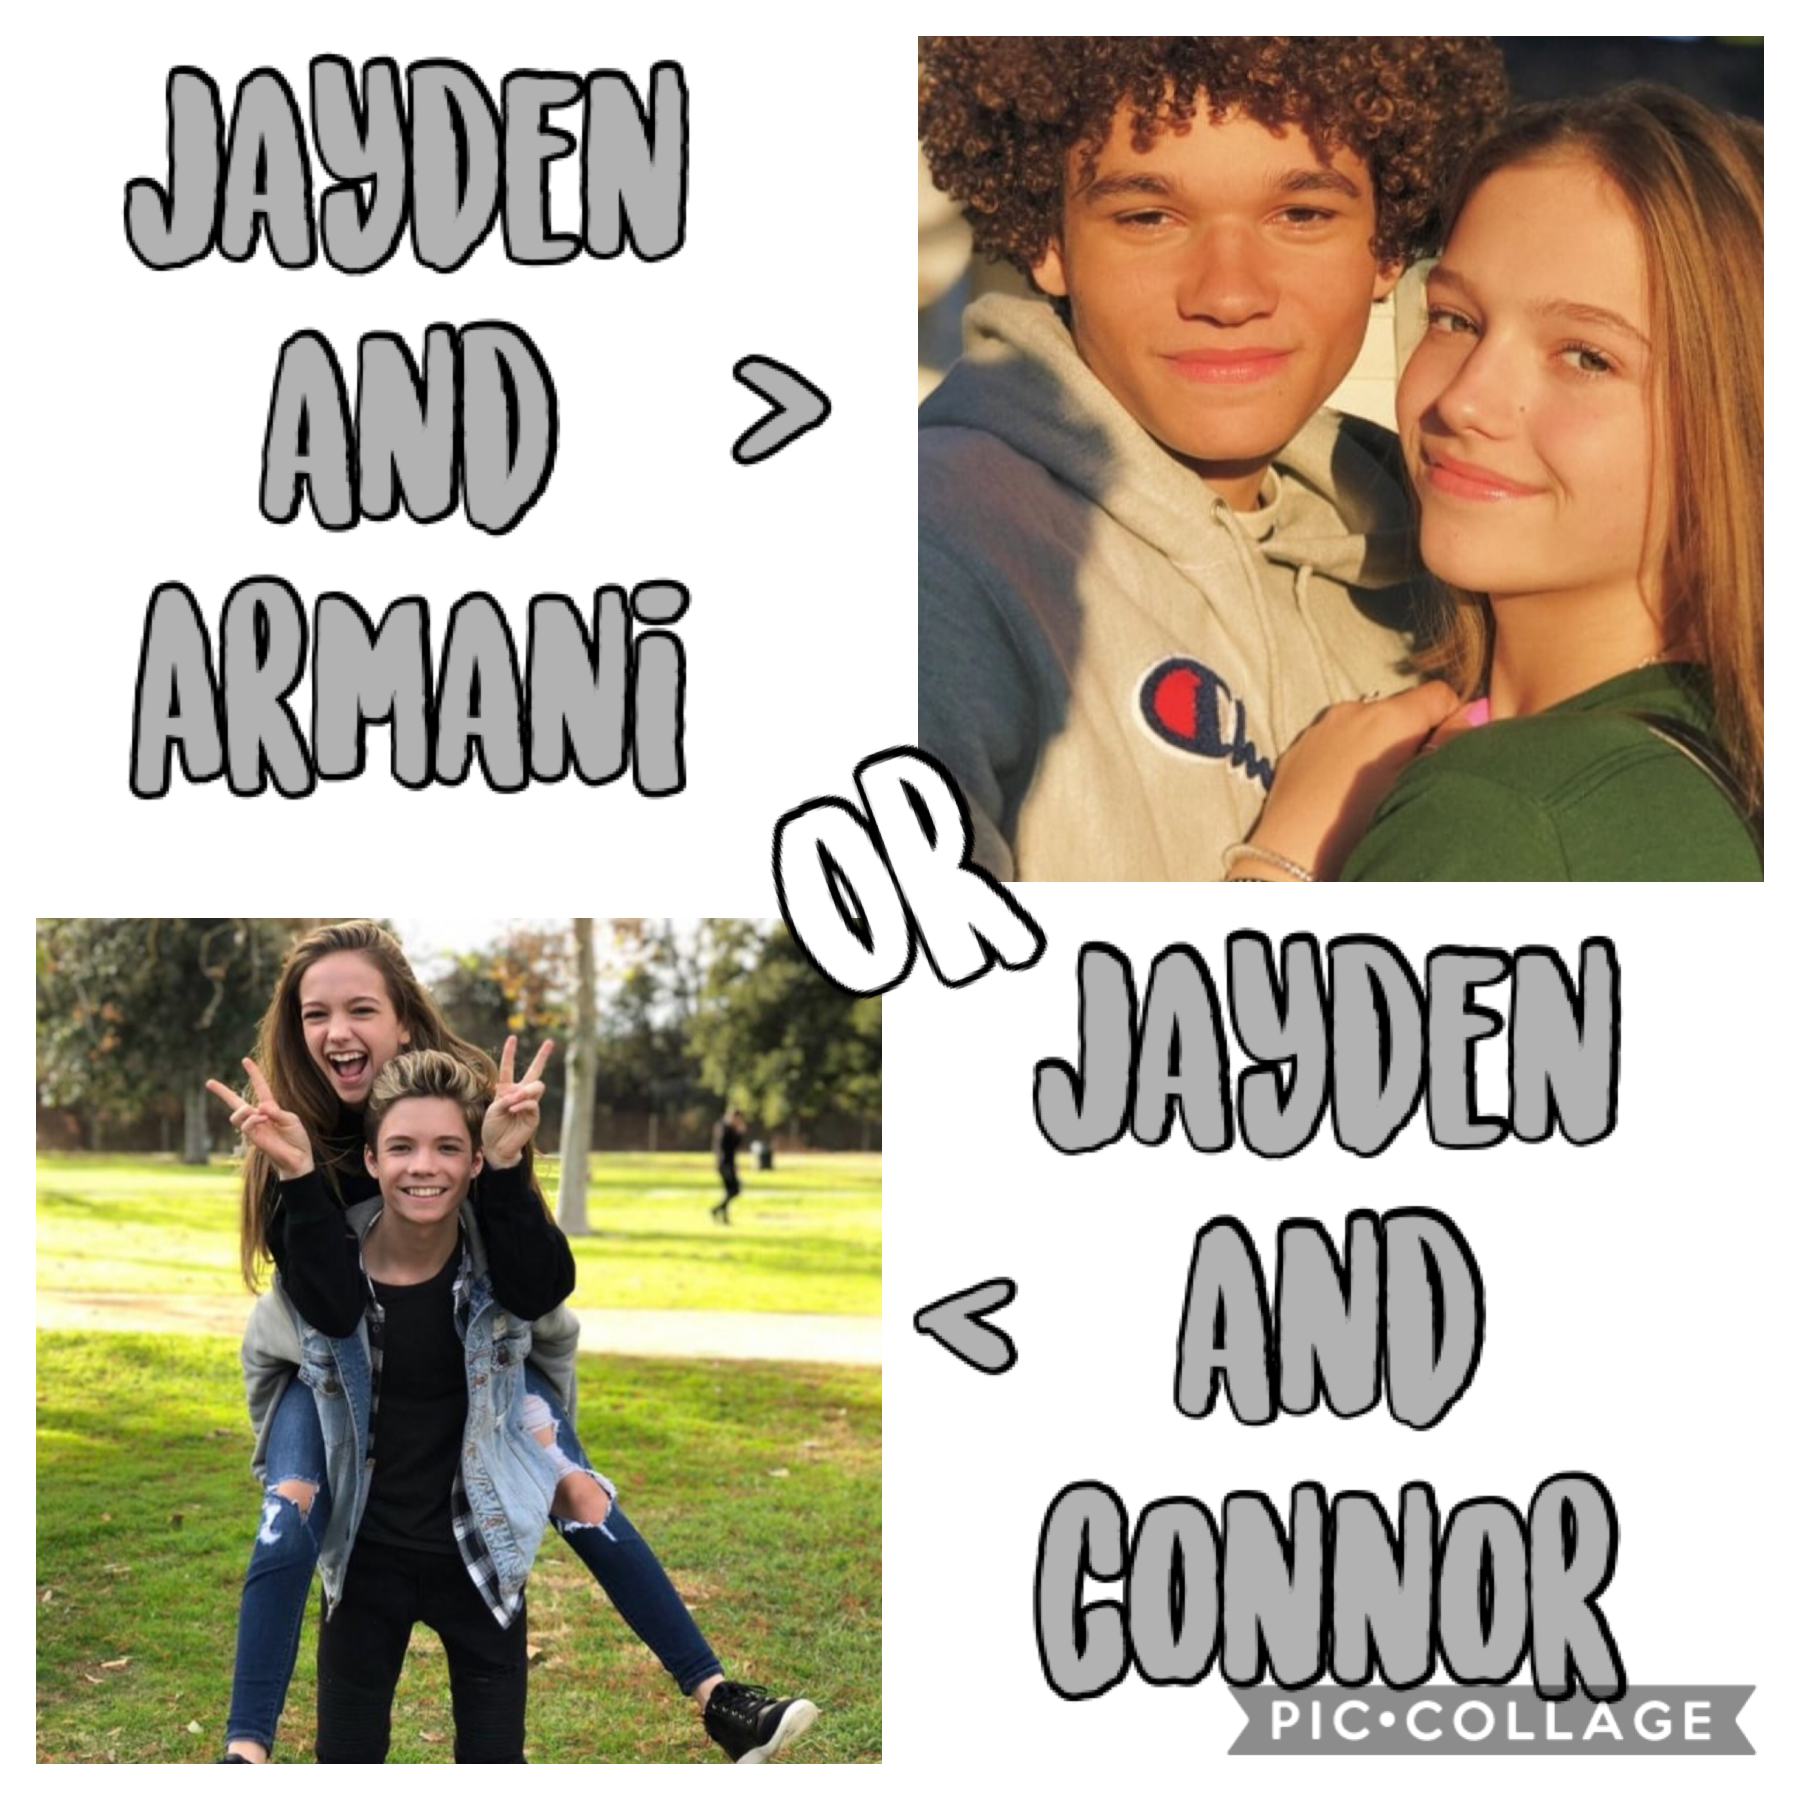 so I know this doesn’t have anything to do with Kenzie  and Annie but Jayden is Annie’s best friend so I figure it counts!!😂 AND I WOULD PICK JAYDEN AND CONNOR 100% I miss them😭😭they are so cute 🖤🖤🖤🥰